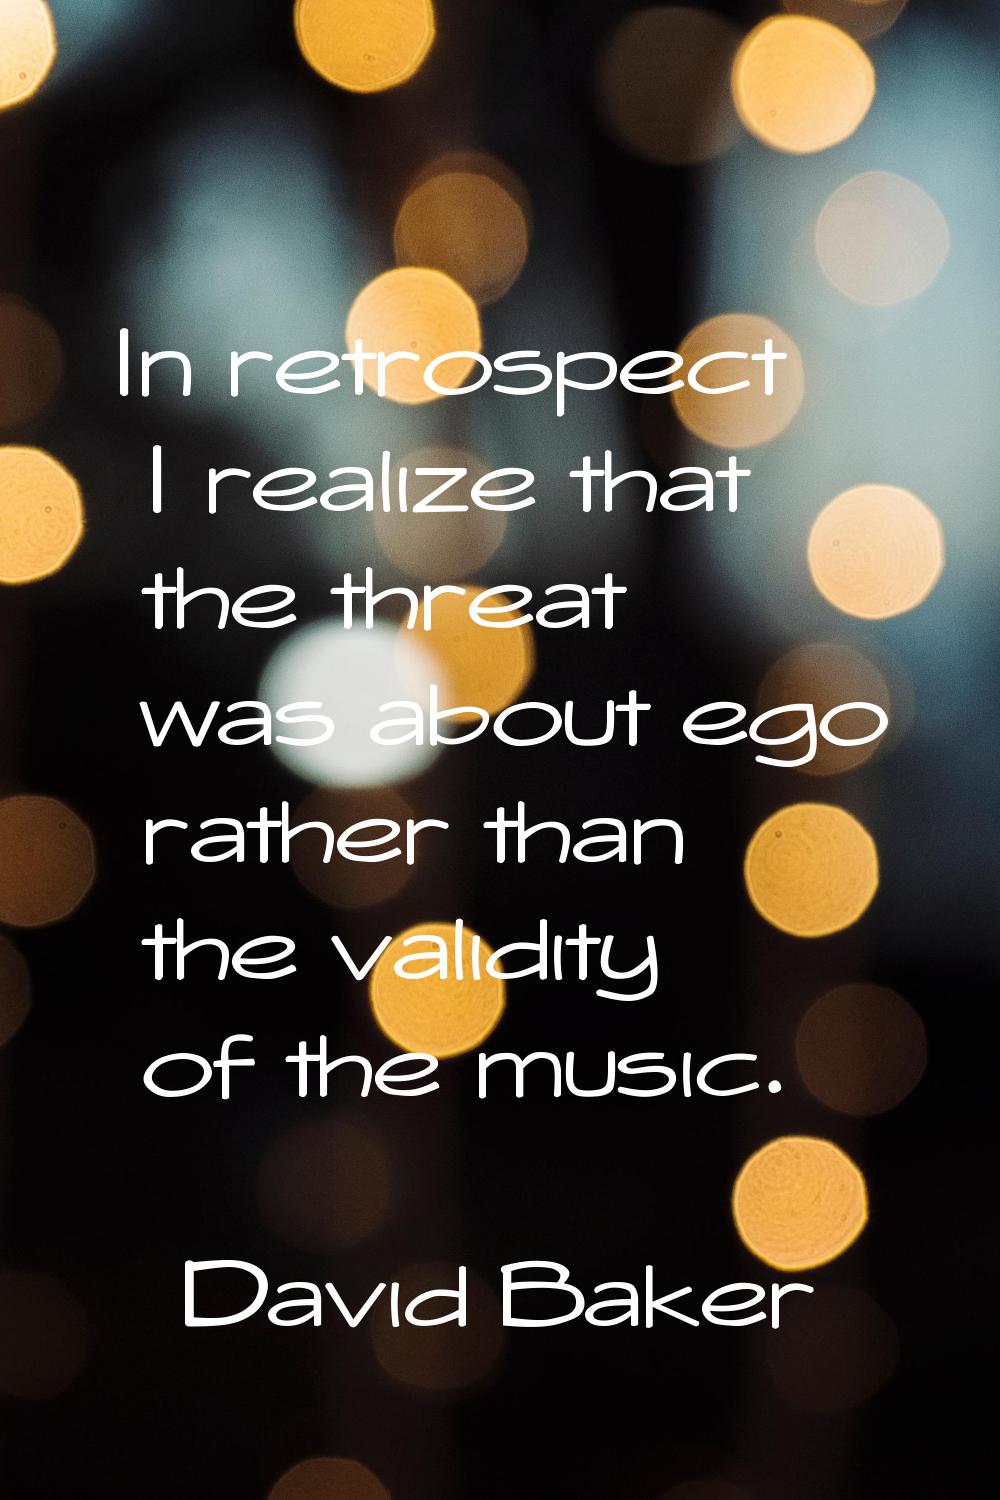 In retrospect I realize that the threat was about ego rather than the validity of the music.